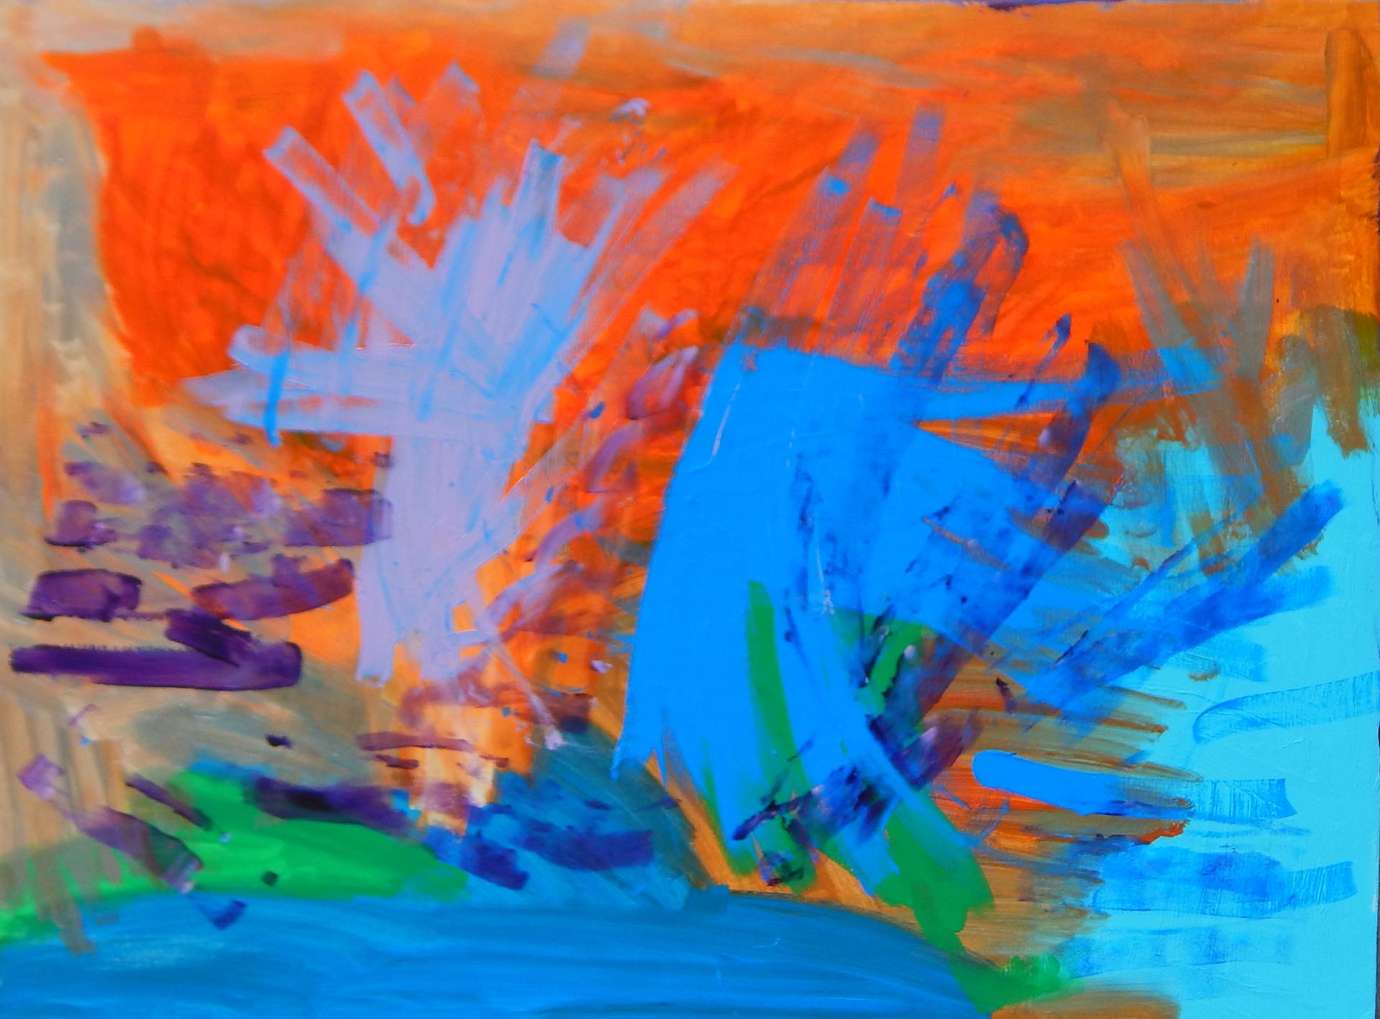 An abstract painting by Wiley Johnson featuring orange, yellow, blues, greens, and purple